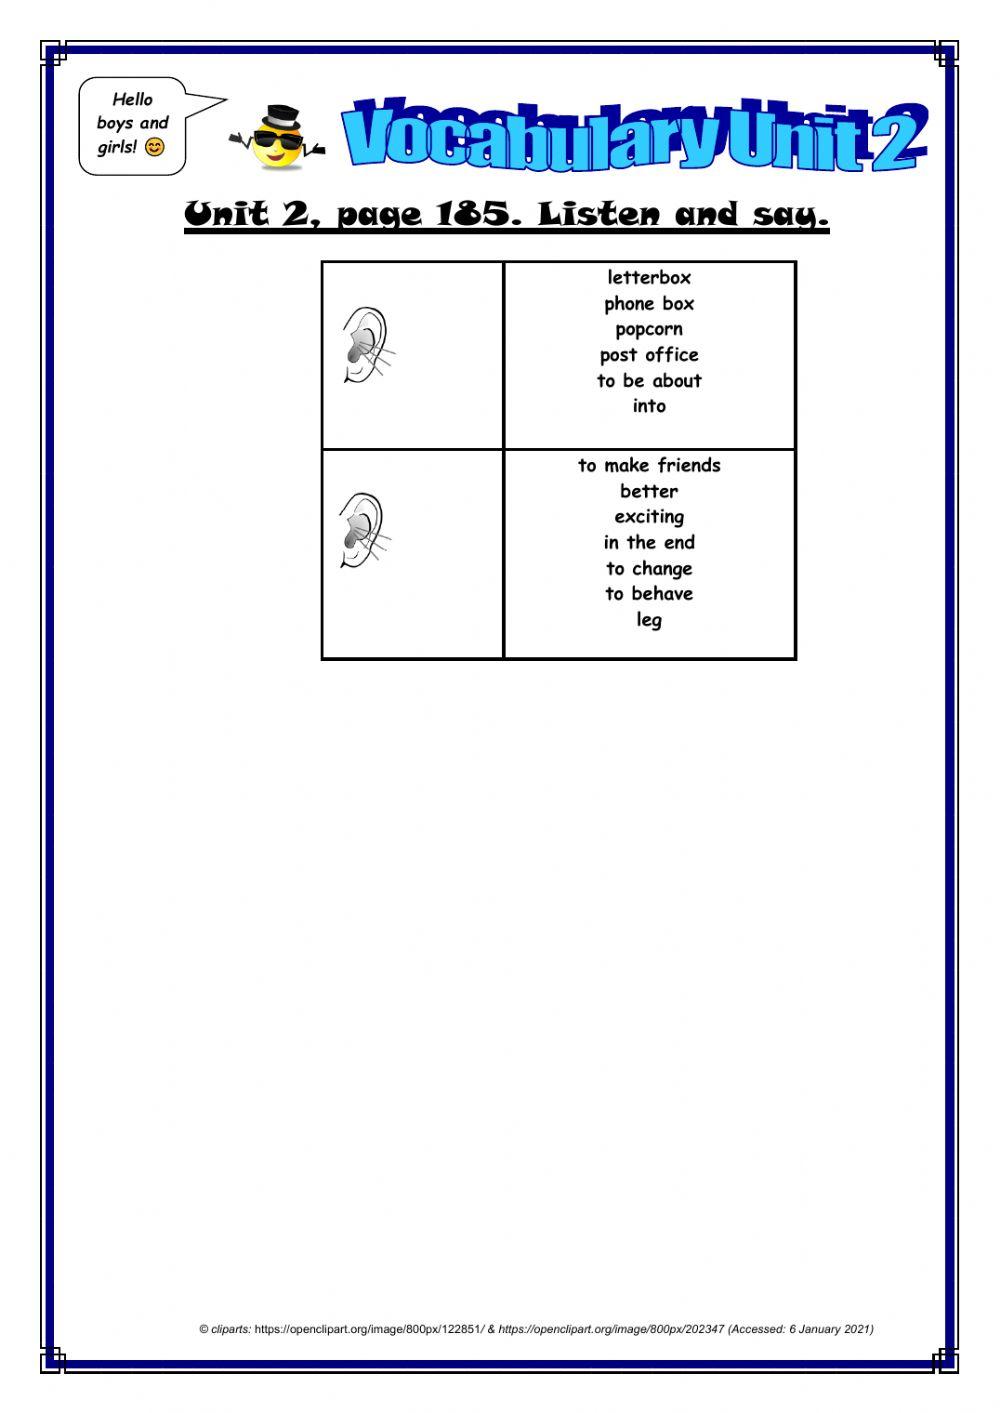 Speaking & vocabulary exercise (page 185)